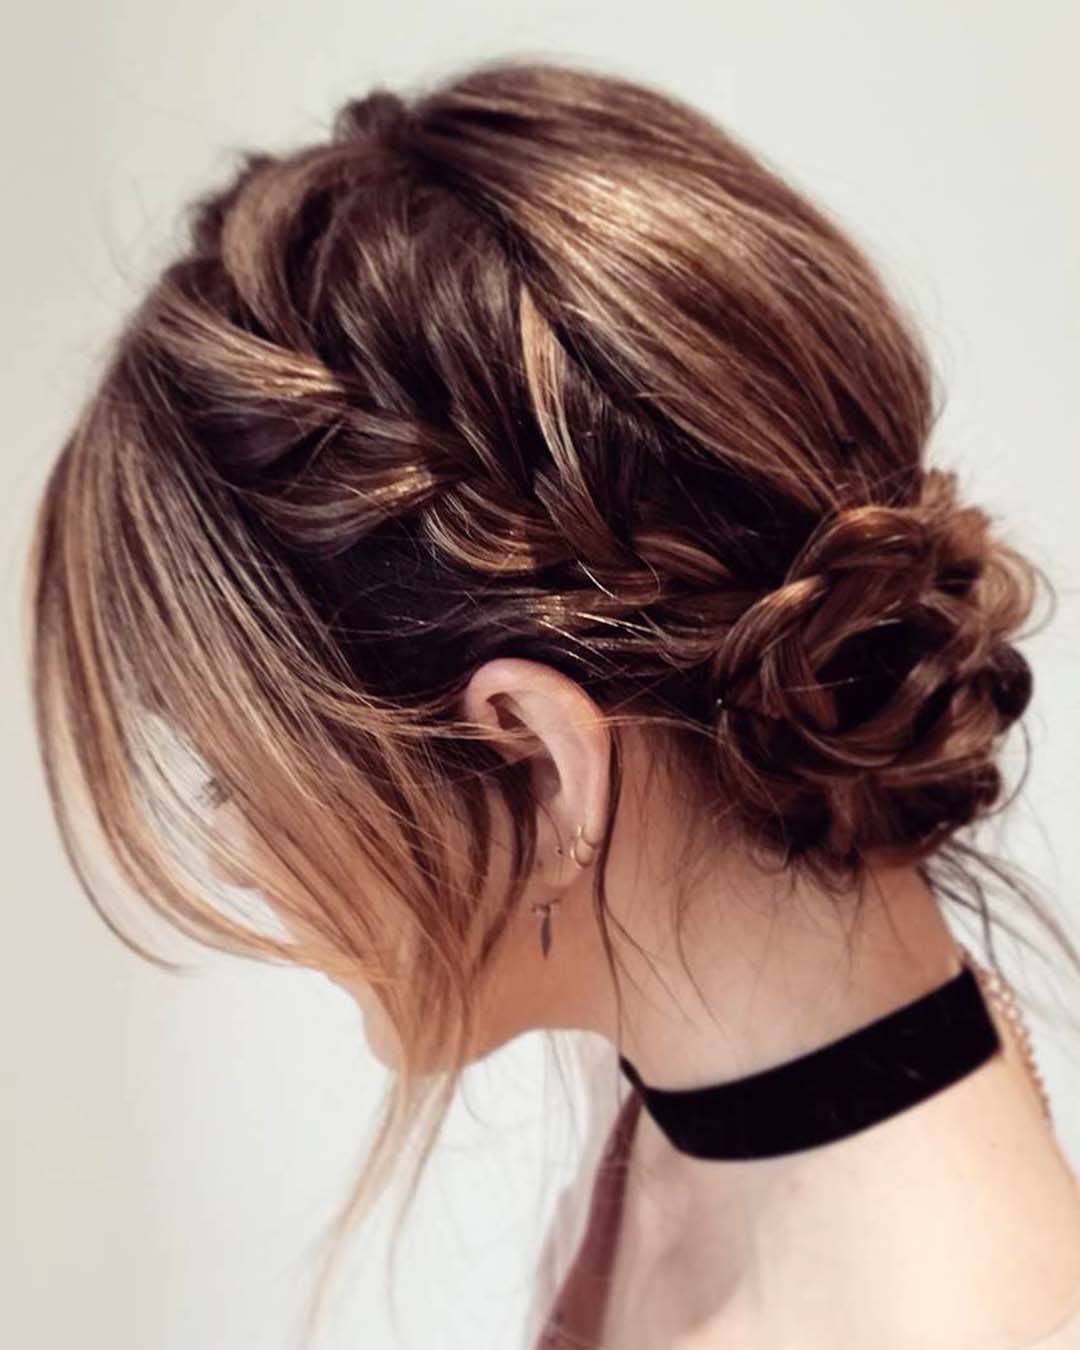 bridesmaid hairstyles relaxed braided updo sarahwhair